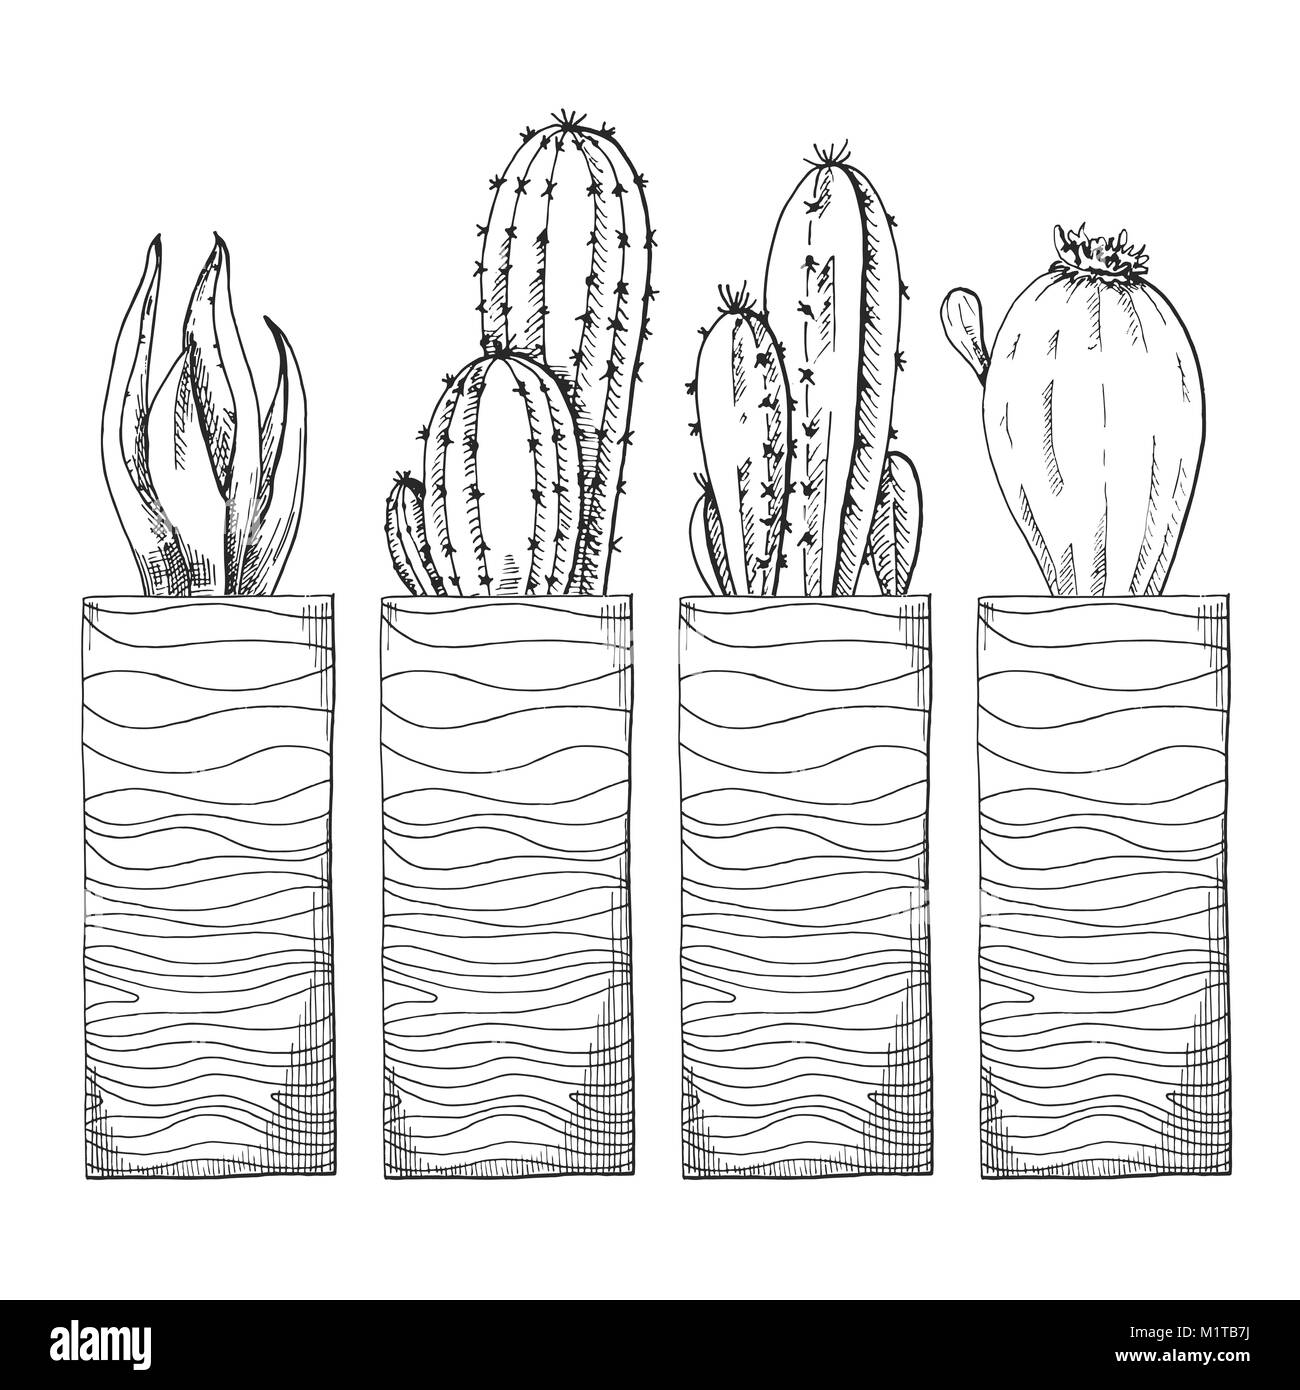 Sketch of succulents in high pots. Vector illustration of a sketch style. Stock Vector